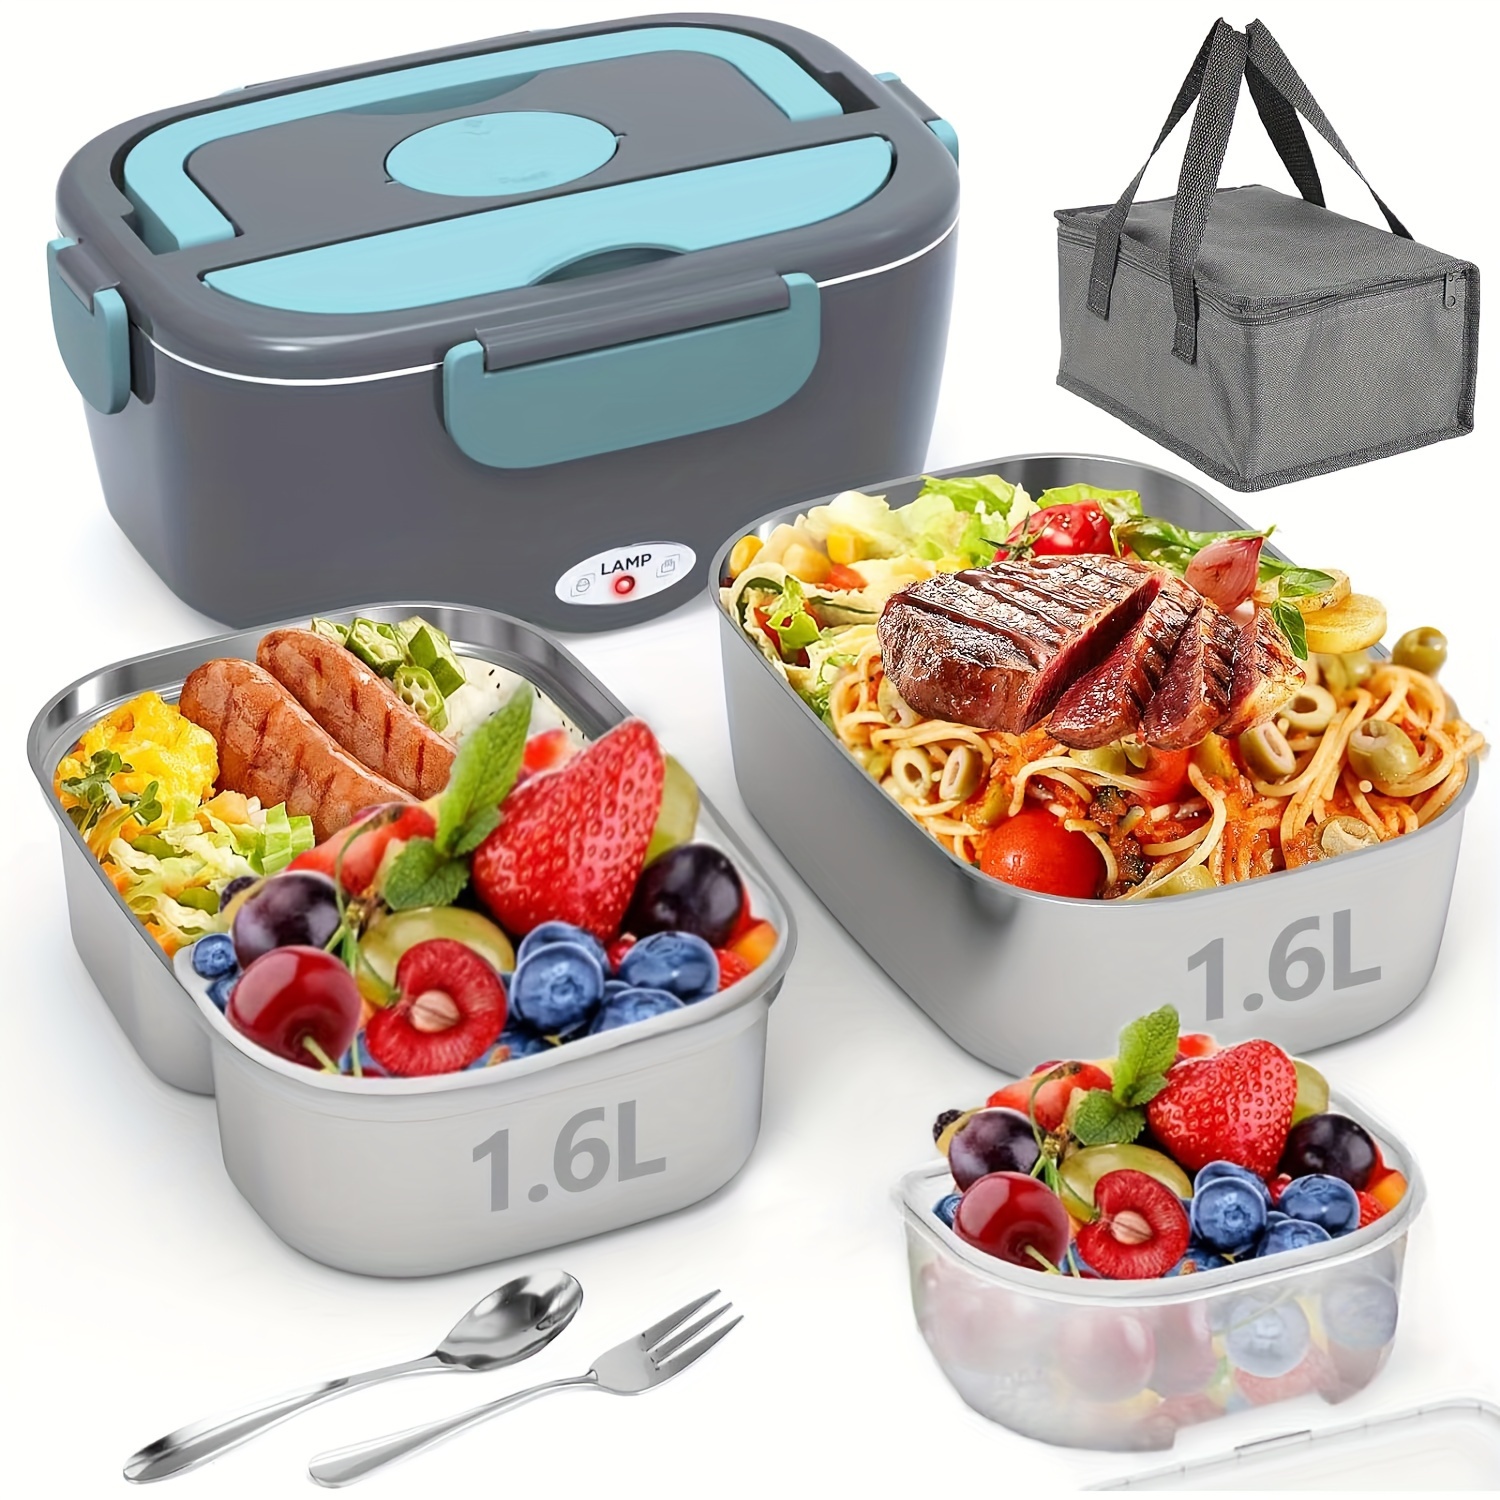 

Electric Lunch Box - Portable Fast Heating Lunch Box (12v/24v/110v) - 1.6l Stainless Steel Container Adult Food Warmer - Suitable For Cars, Trucks, Offices And Outdoors (green)